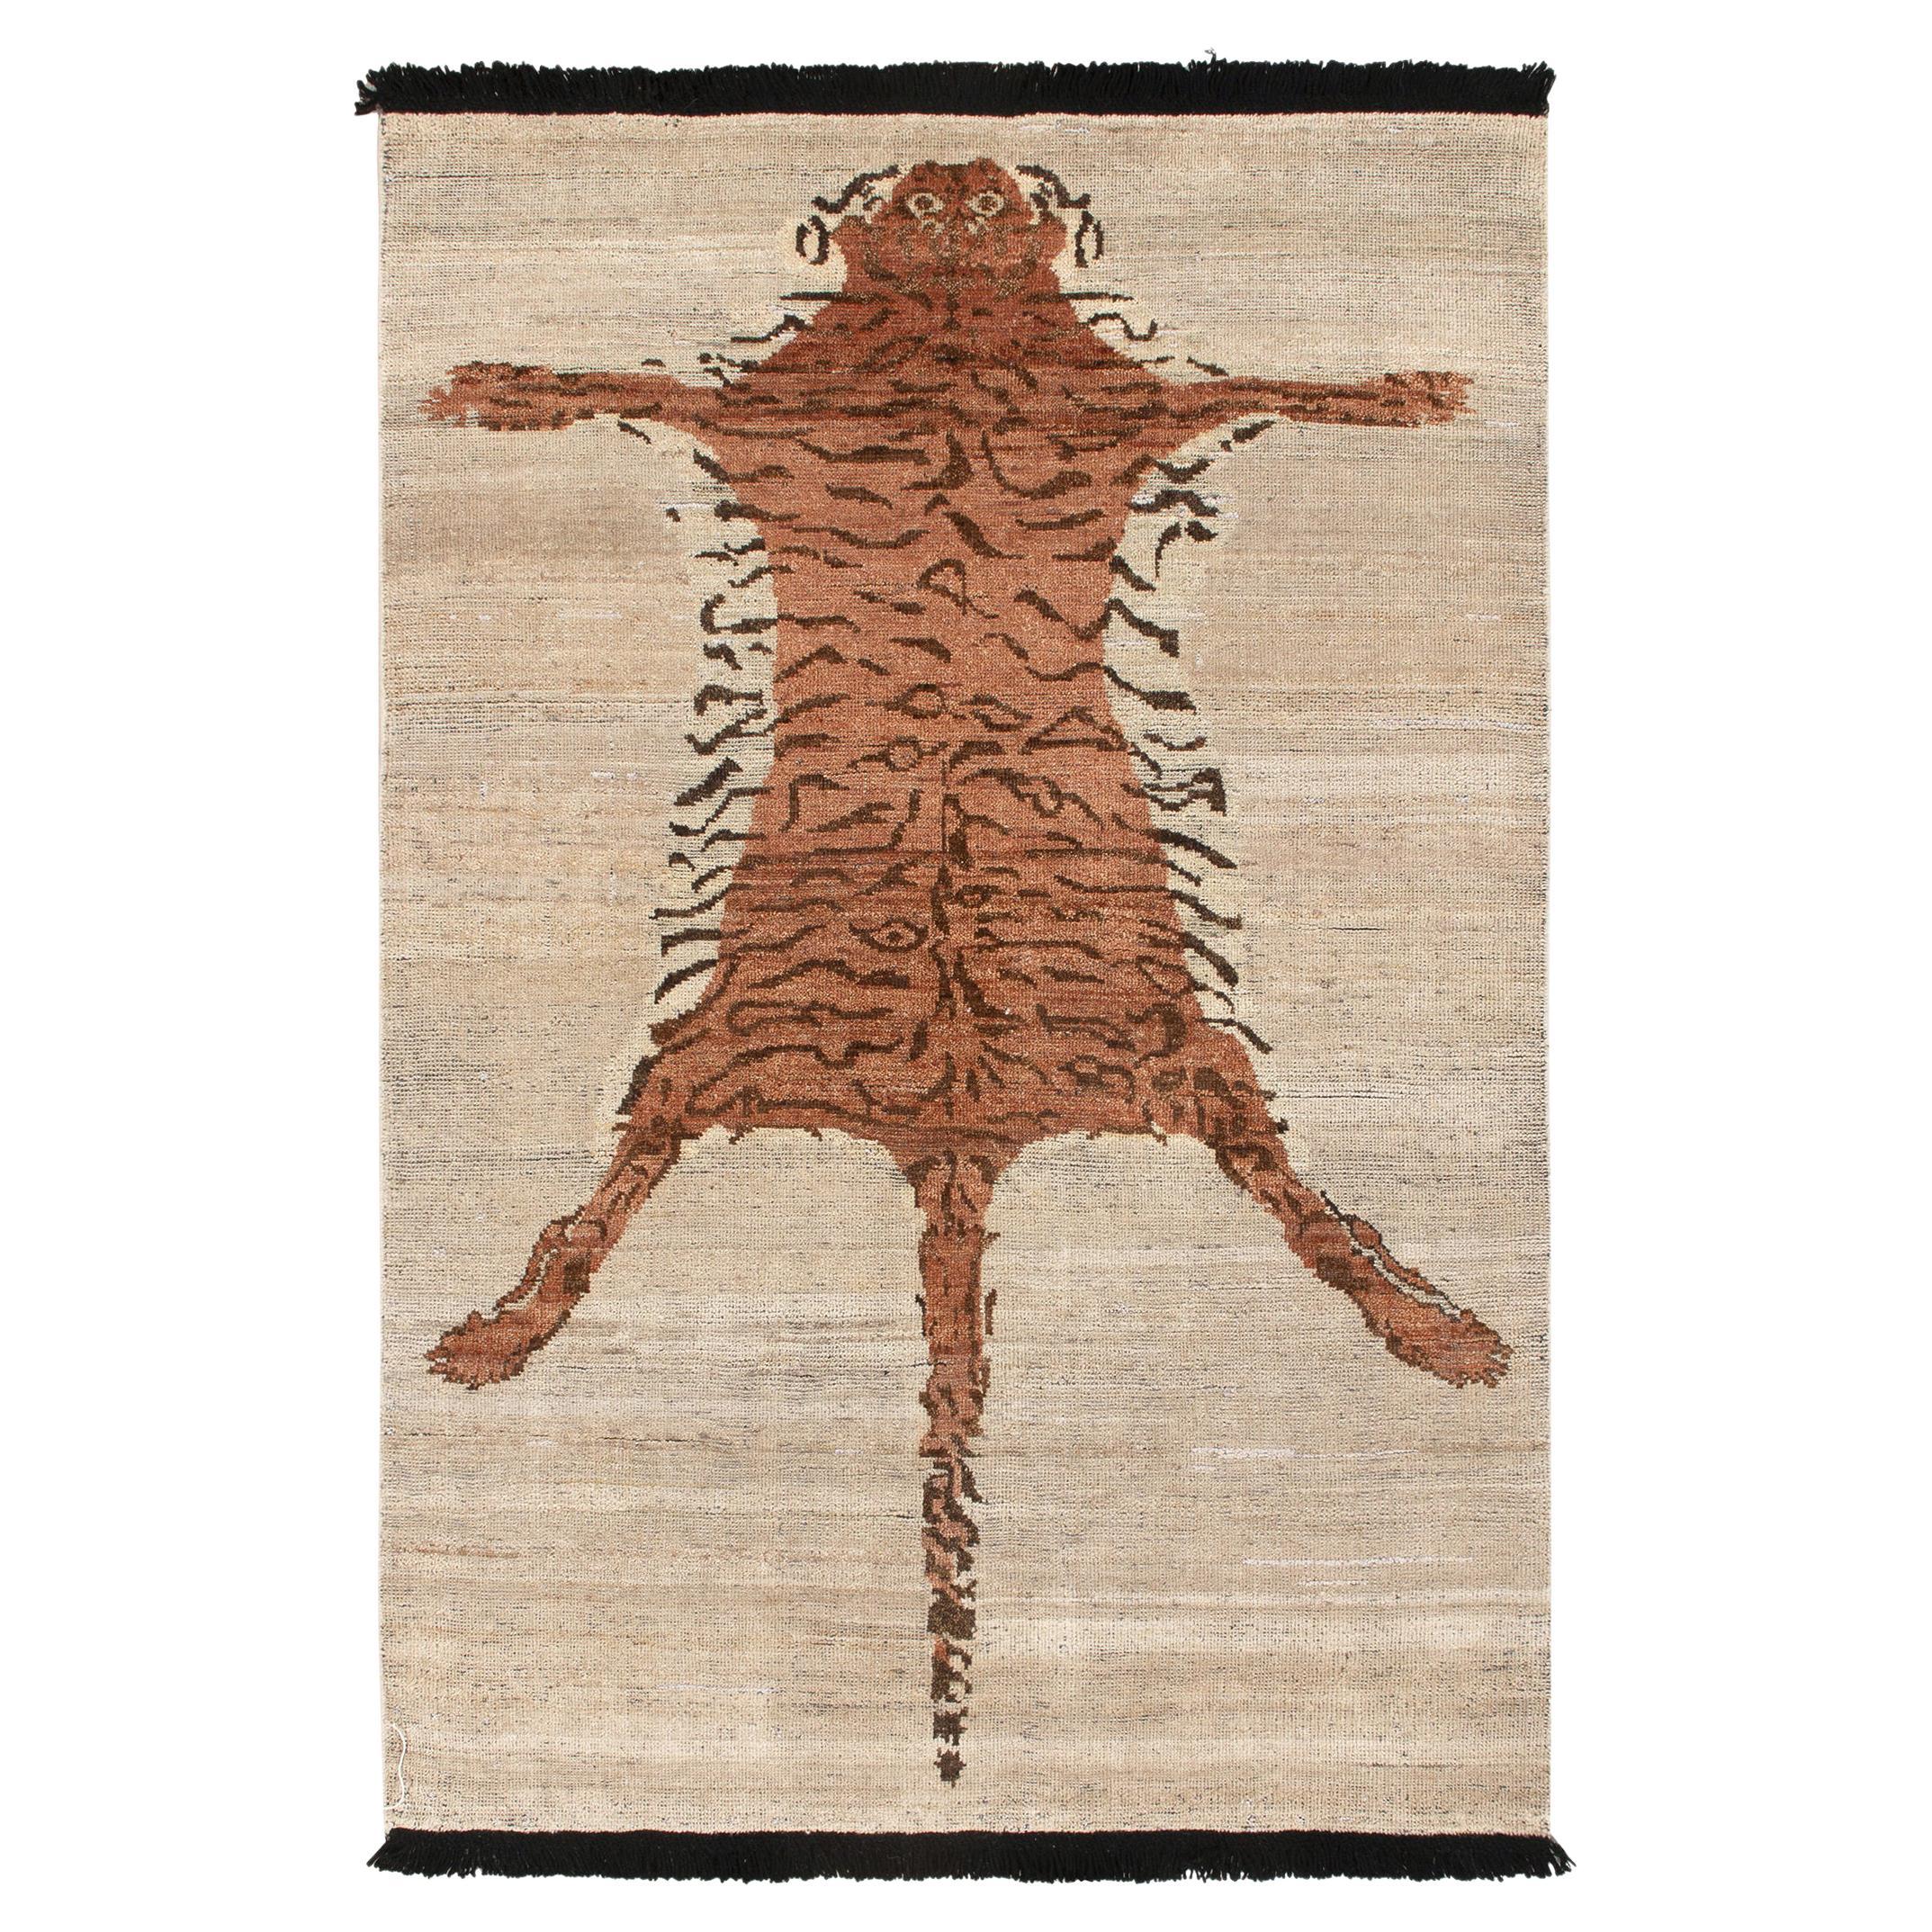 Rug & Kilim's Classic Style Contemporary Tiger Rug in Beige-Brown, Orange For Sale